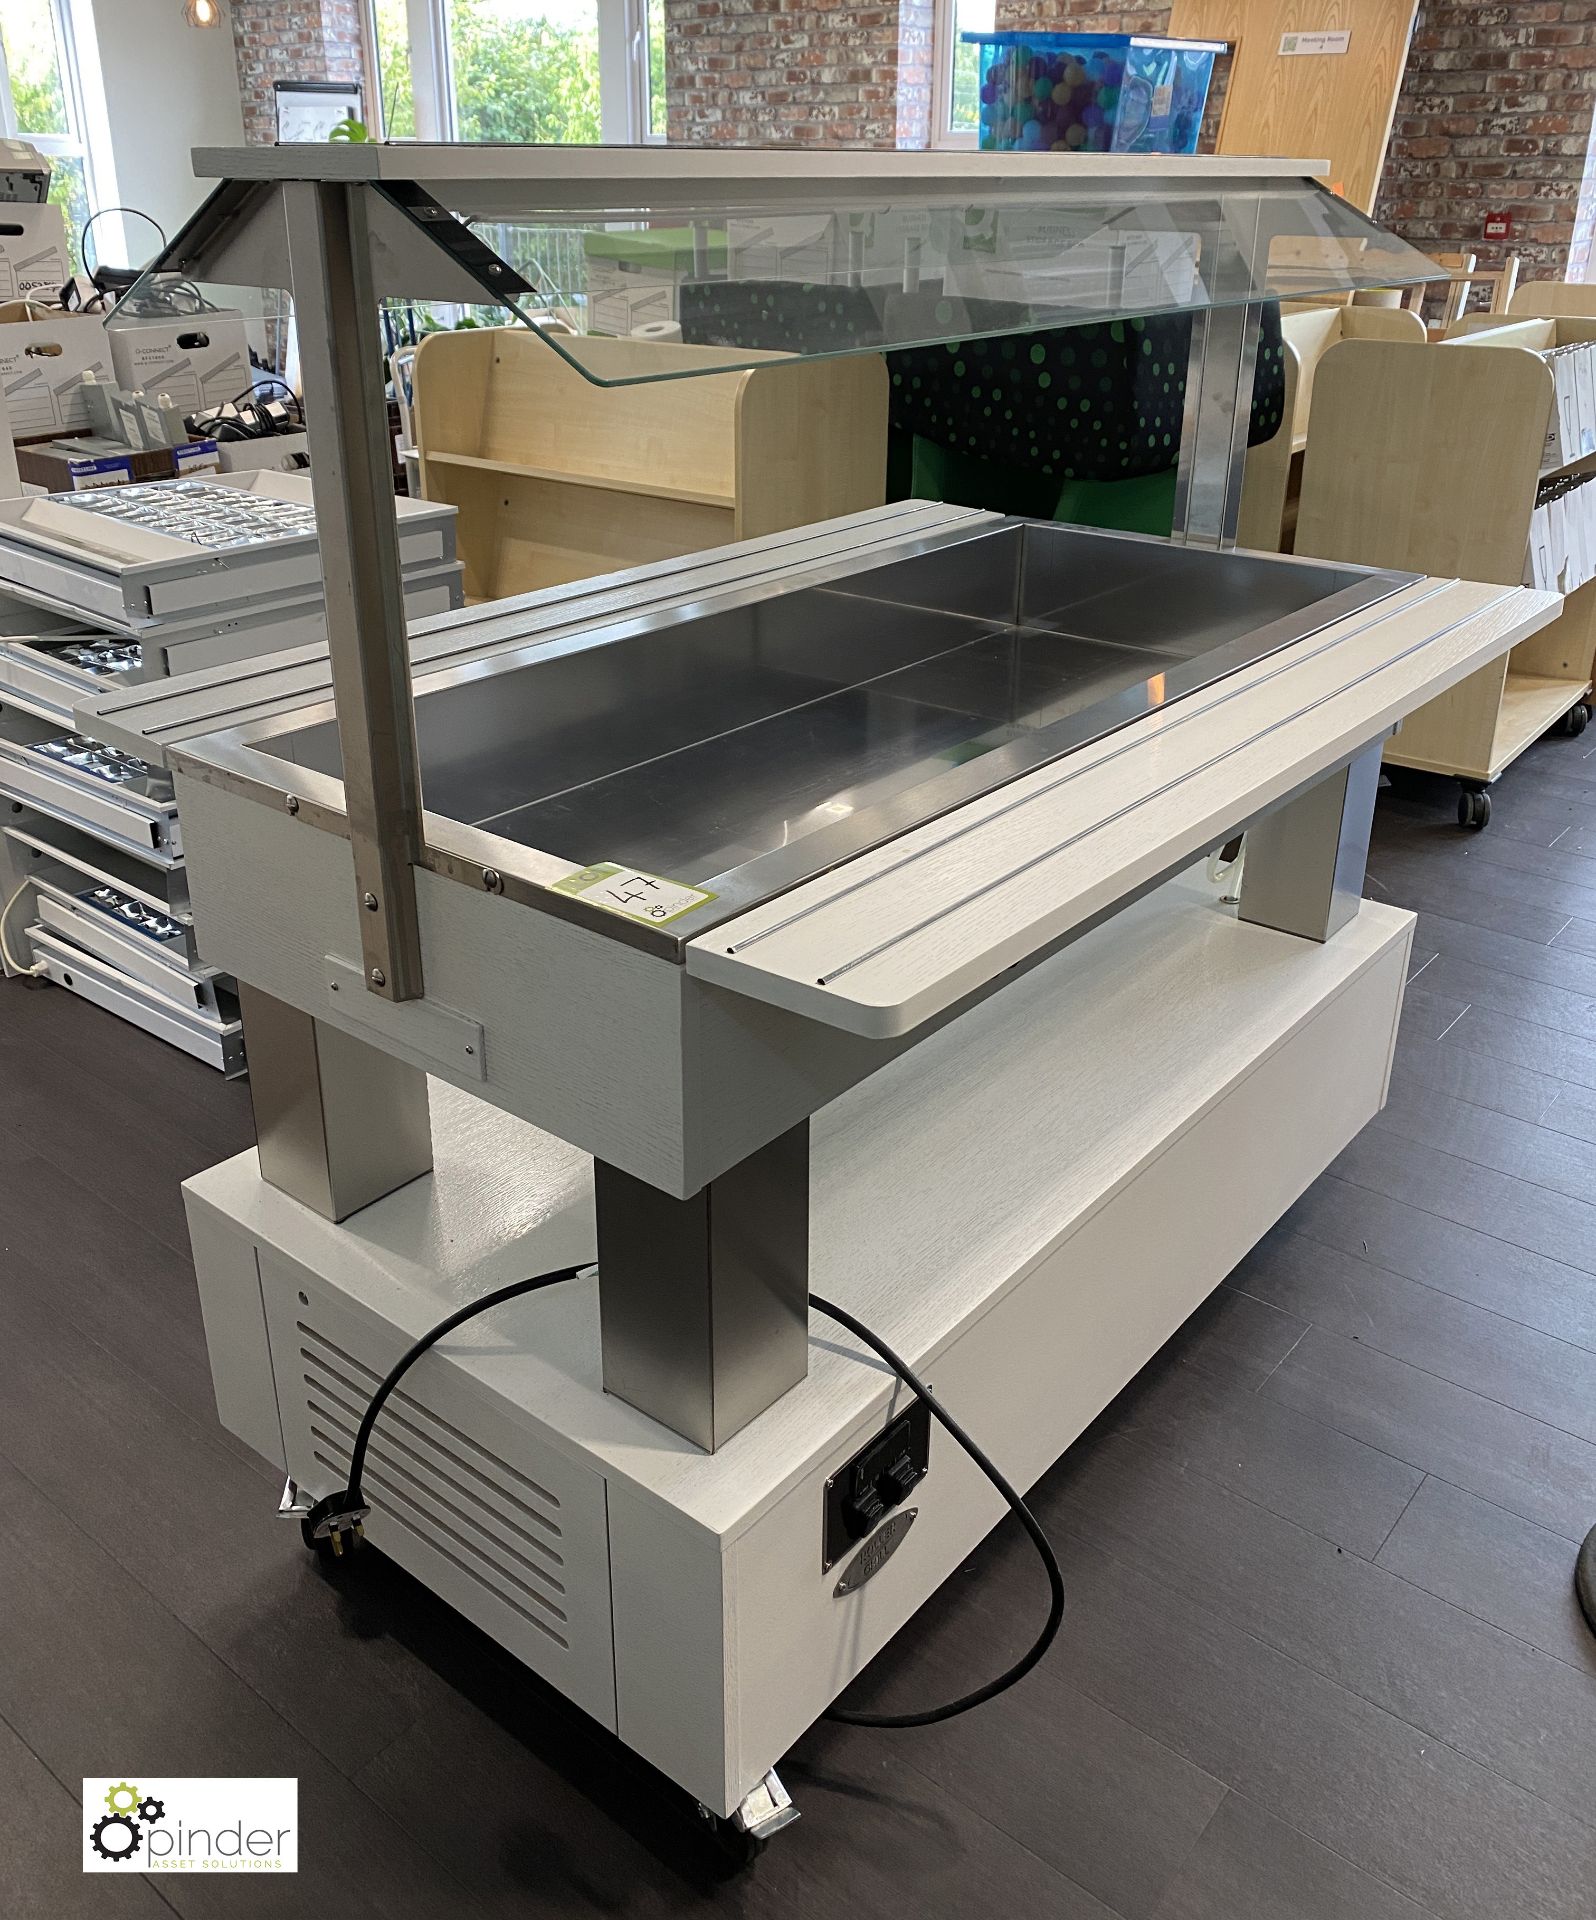 Roller Grill mobile Servery, with gantry lights, 1370mm x 950mm x 880mm (full height 1365mm), - Image 3 of 6